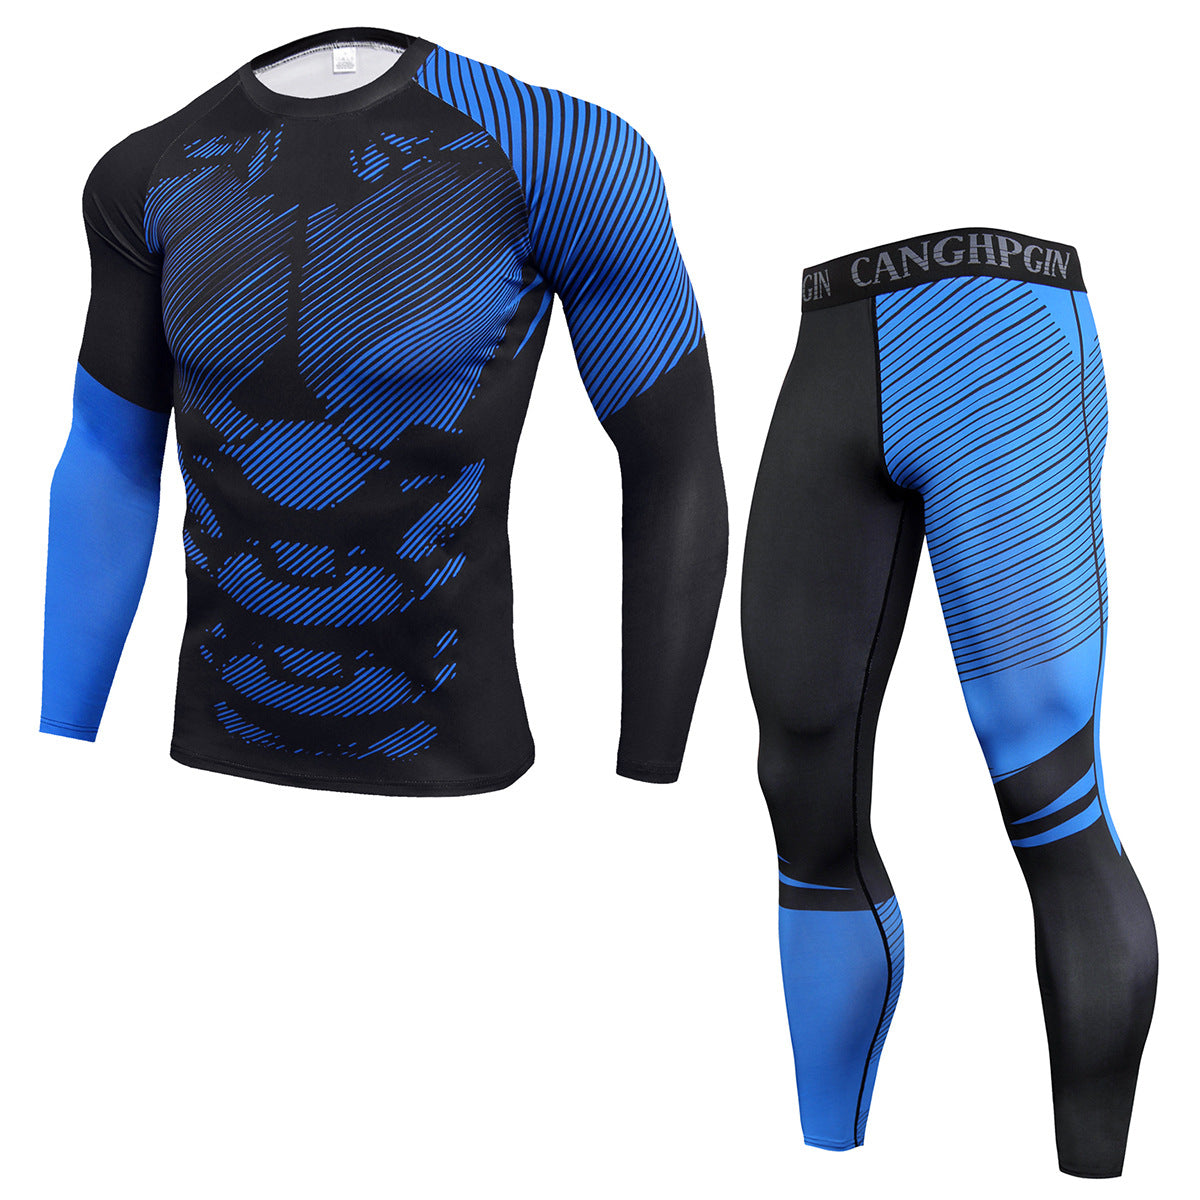 Men's PRO Tight Fitness Sports Training Suit Stretch